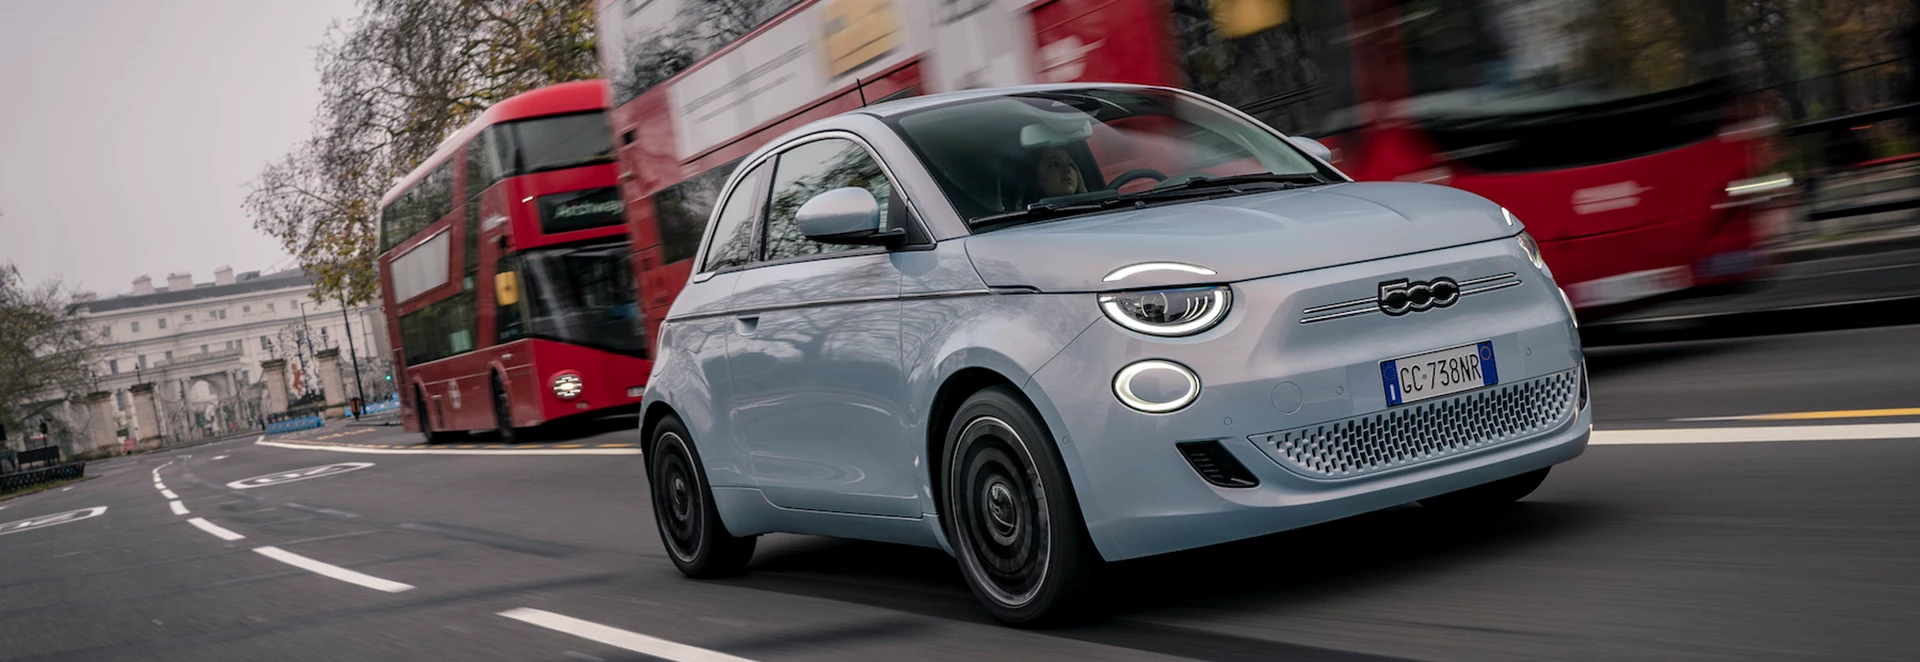 5 reasons why the Fiat 500 electric is a great city EV 